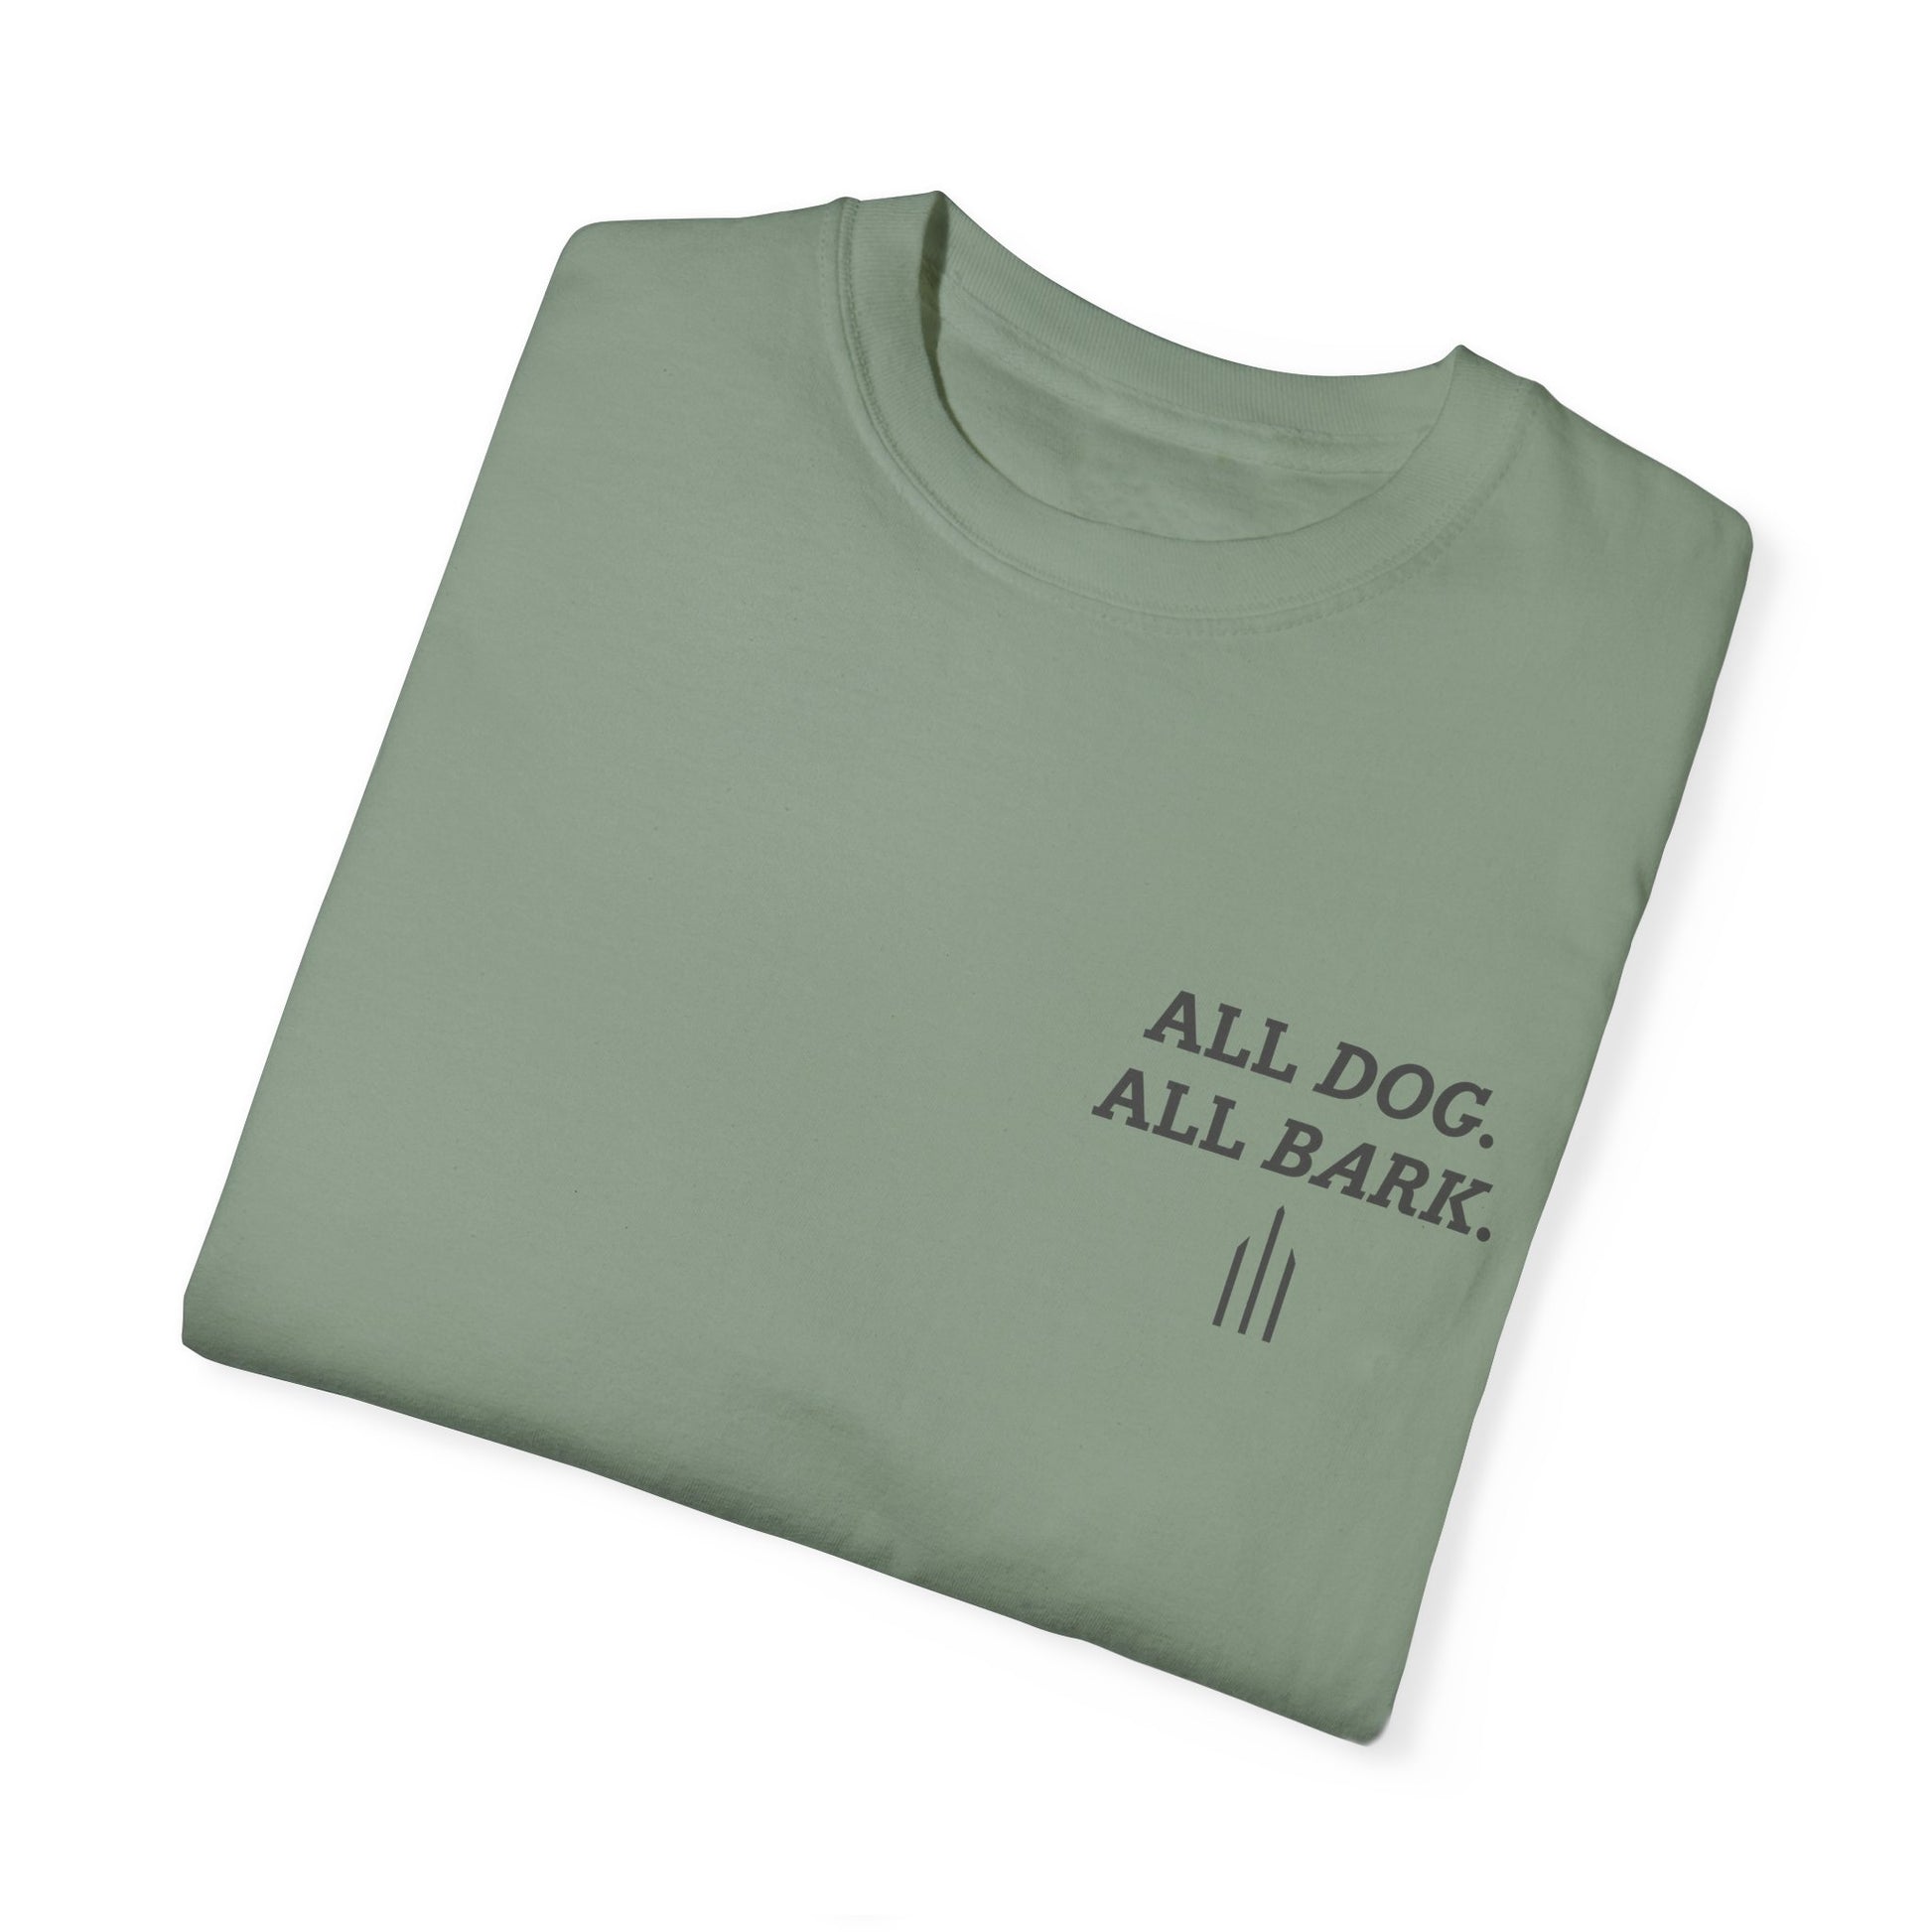 Casual Bay T-Shirt w/ Text And Dog Graphic